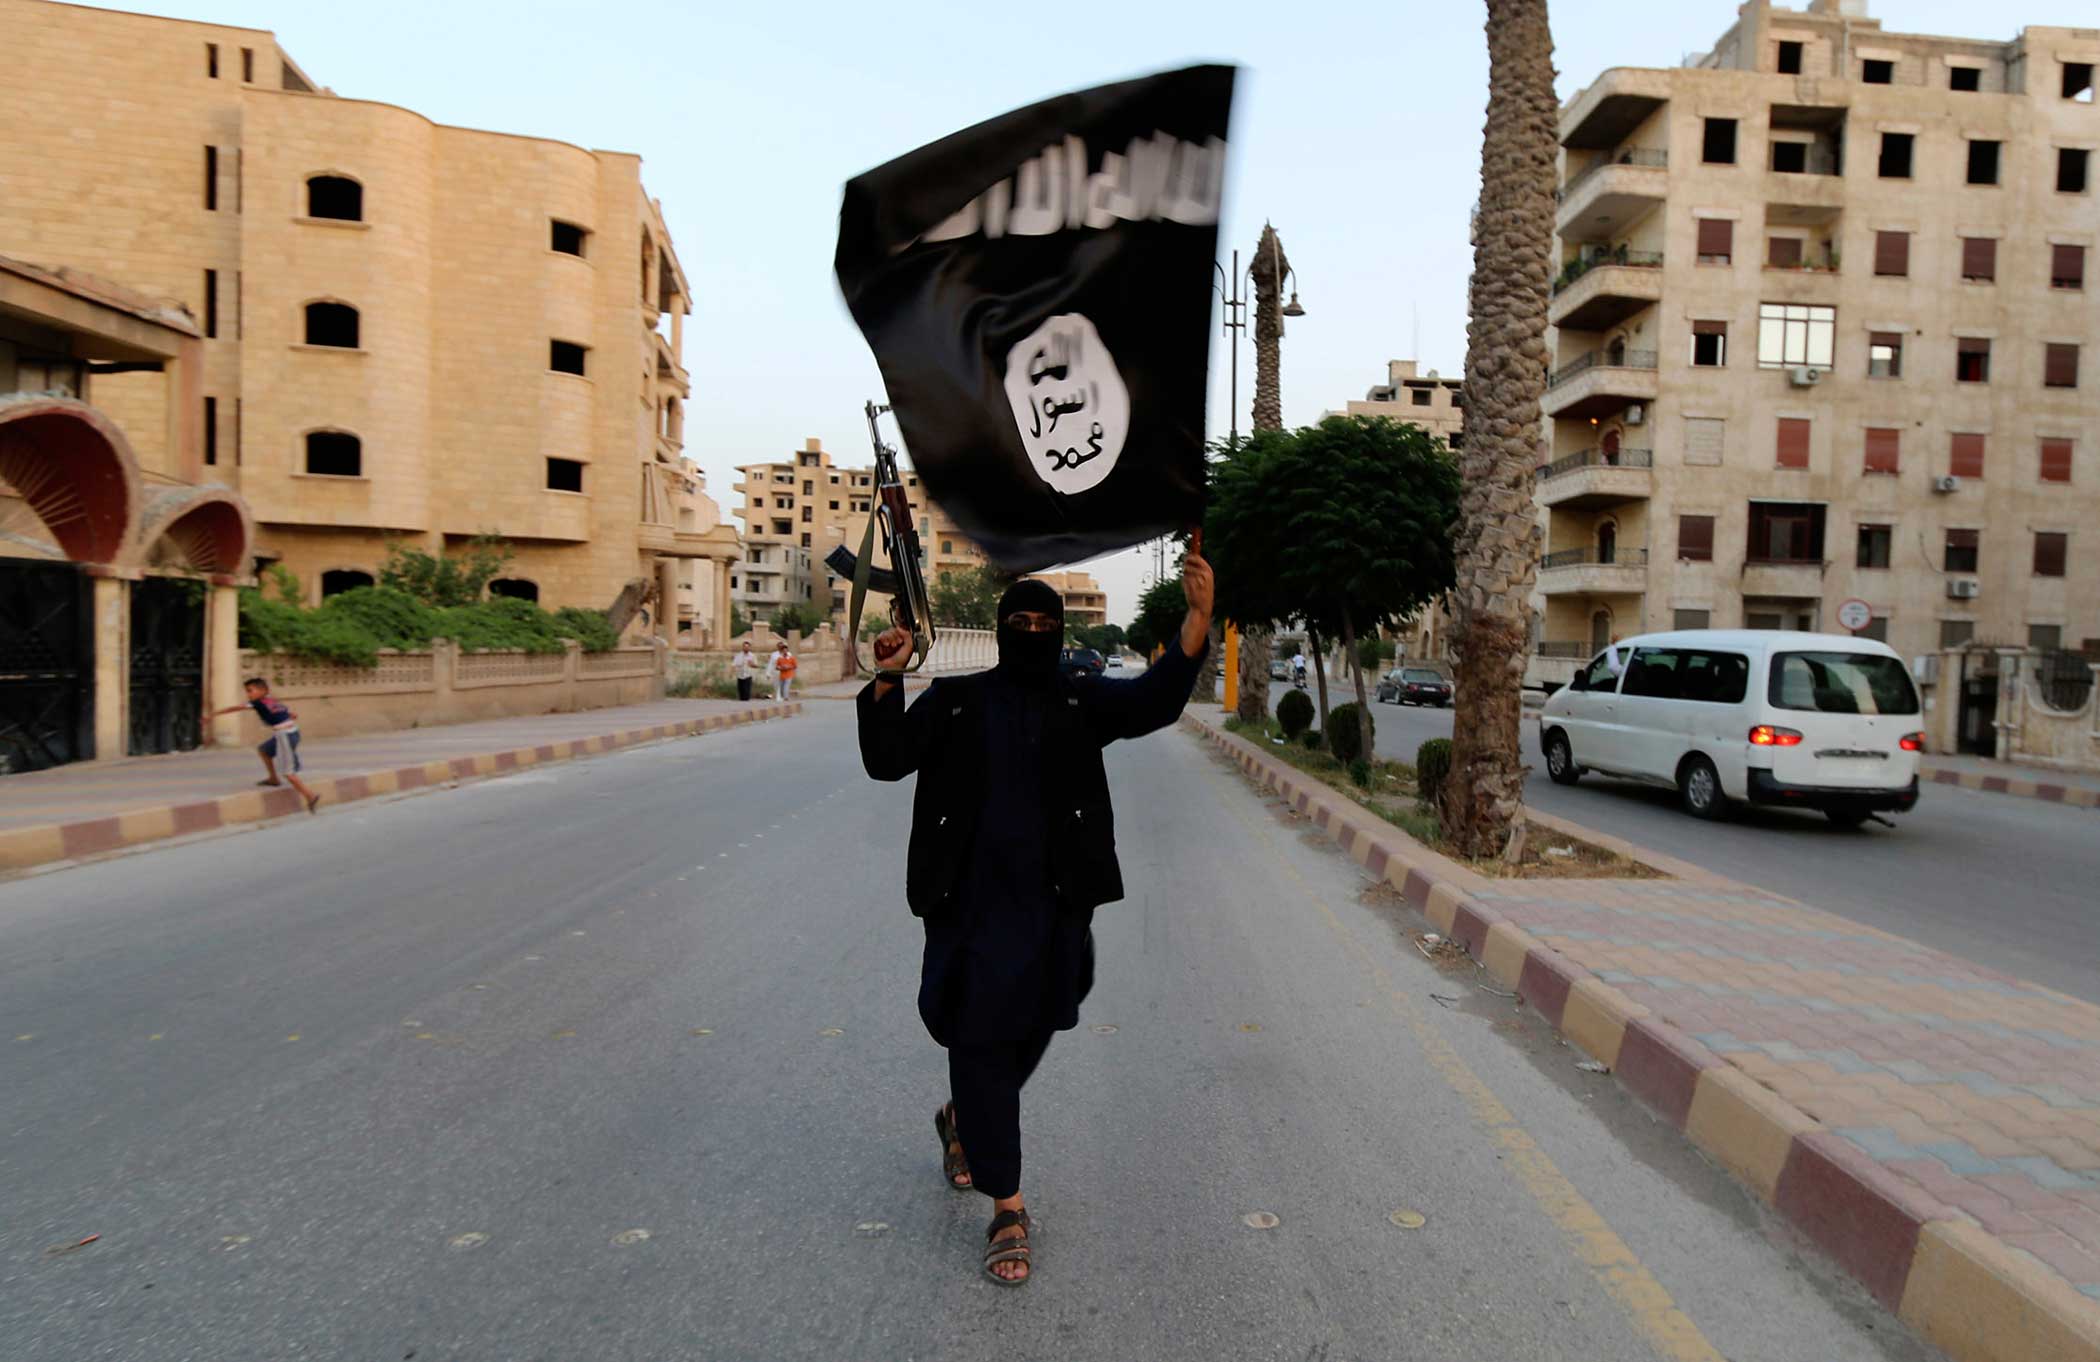 An Islamic State of Iraq and Syria waves an ISIS flag in Raqqa, Syria, on June 29, 2014 (Reuters)